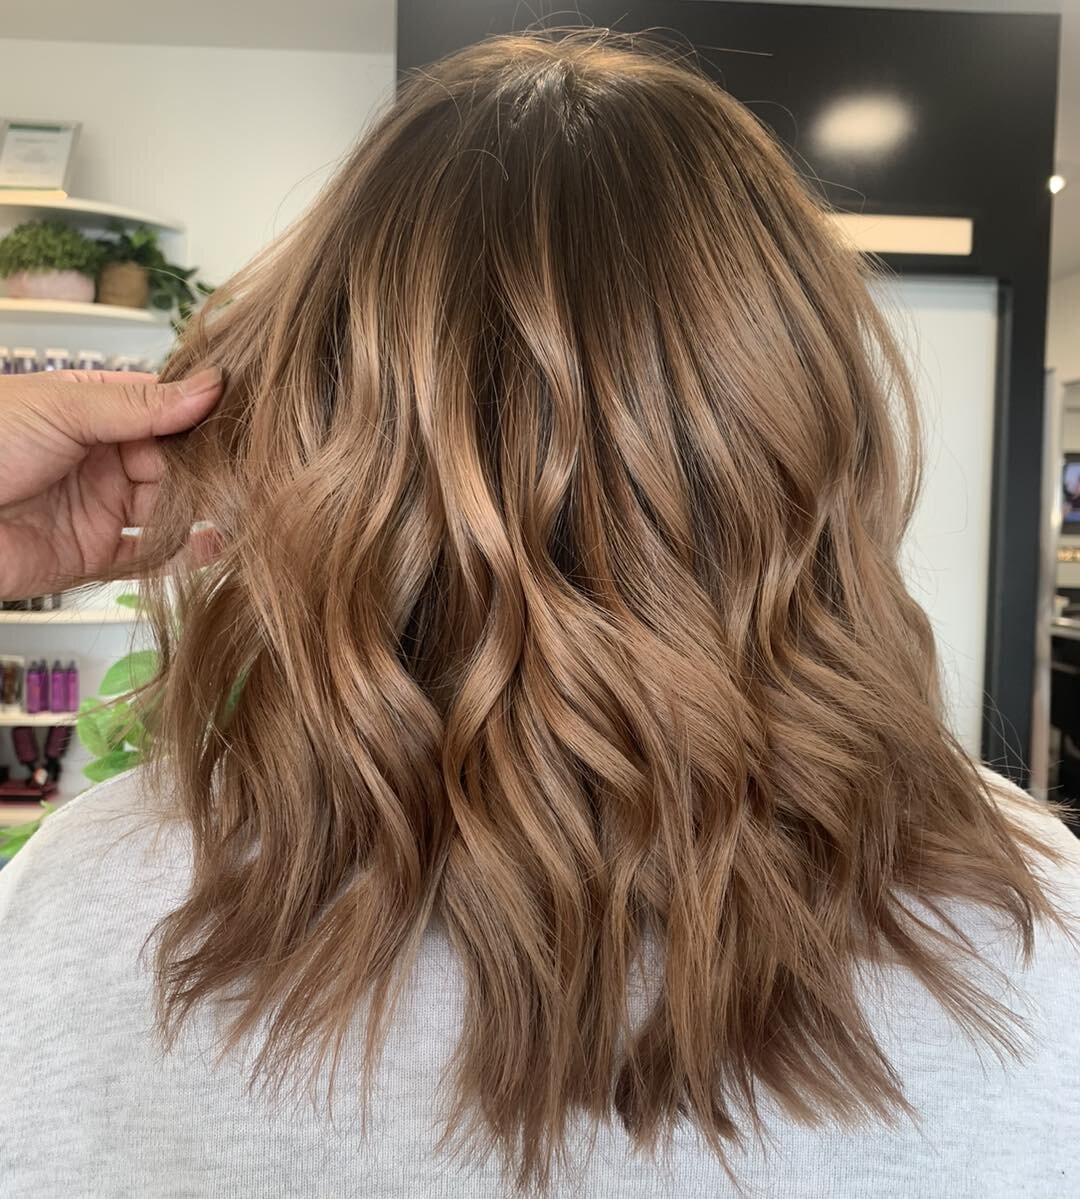 Toffee 💛

Another amazing creation by Audrey! 

#schwarzkopf #schwarzkopfprofessional #schwarzkopfpro #ghd #ghdcurls #salon #toffeehair #toffeehaircolor